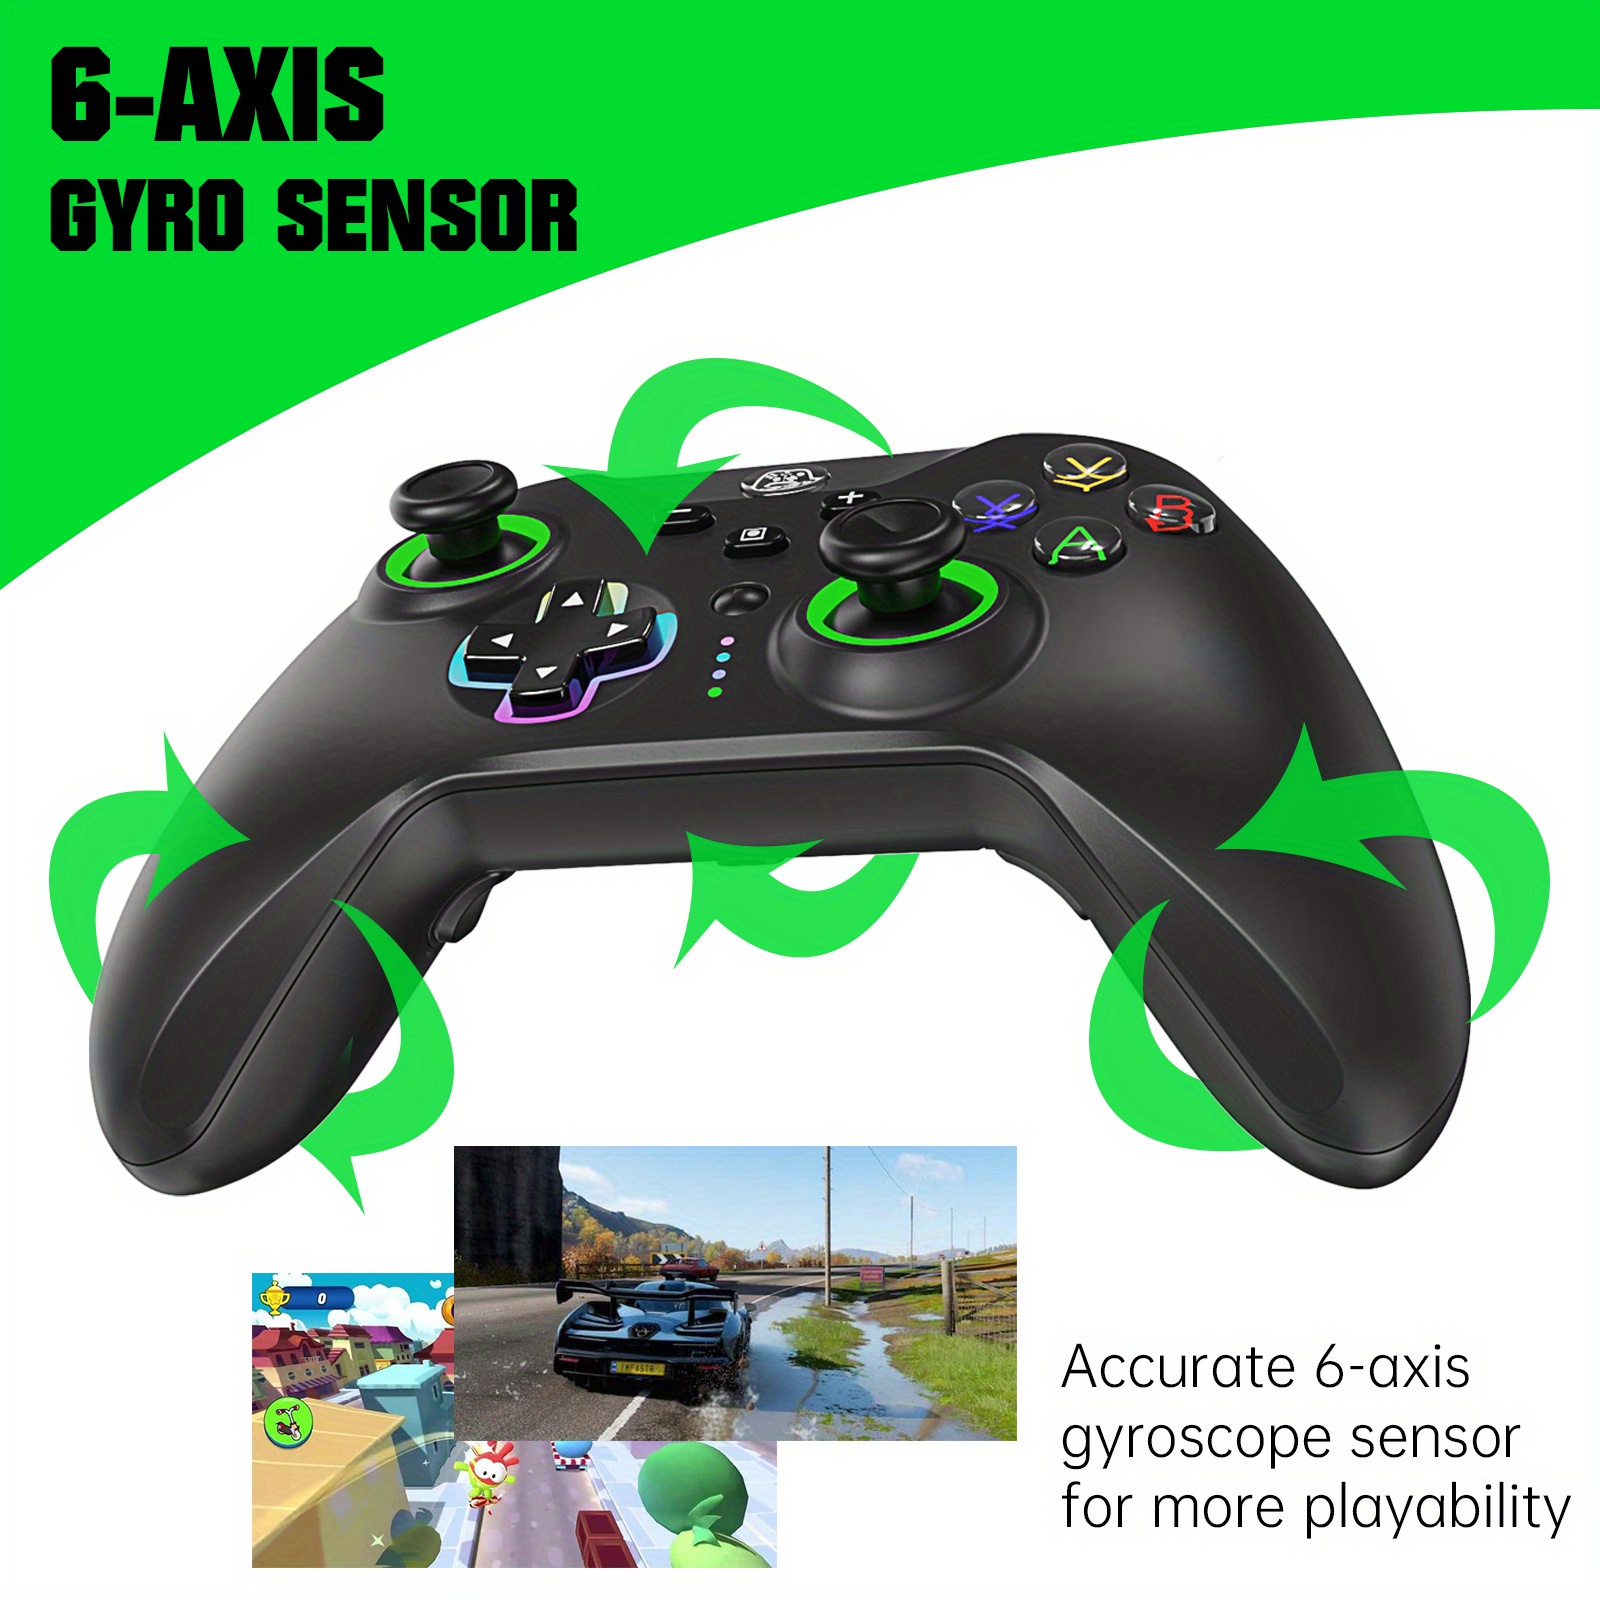 Wireless Xbox Controller for Xbox One, Xbox Series S/X, Xbox One S/X, PC,  Windows 7/8/10/11, Turbo Function, Built-in Dual Vibration, 2.4GHz